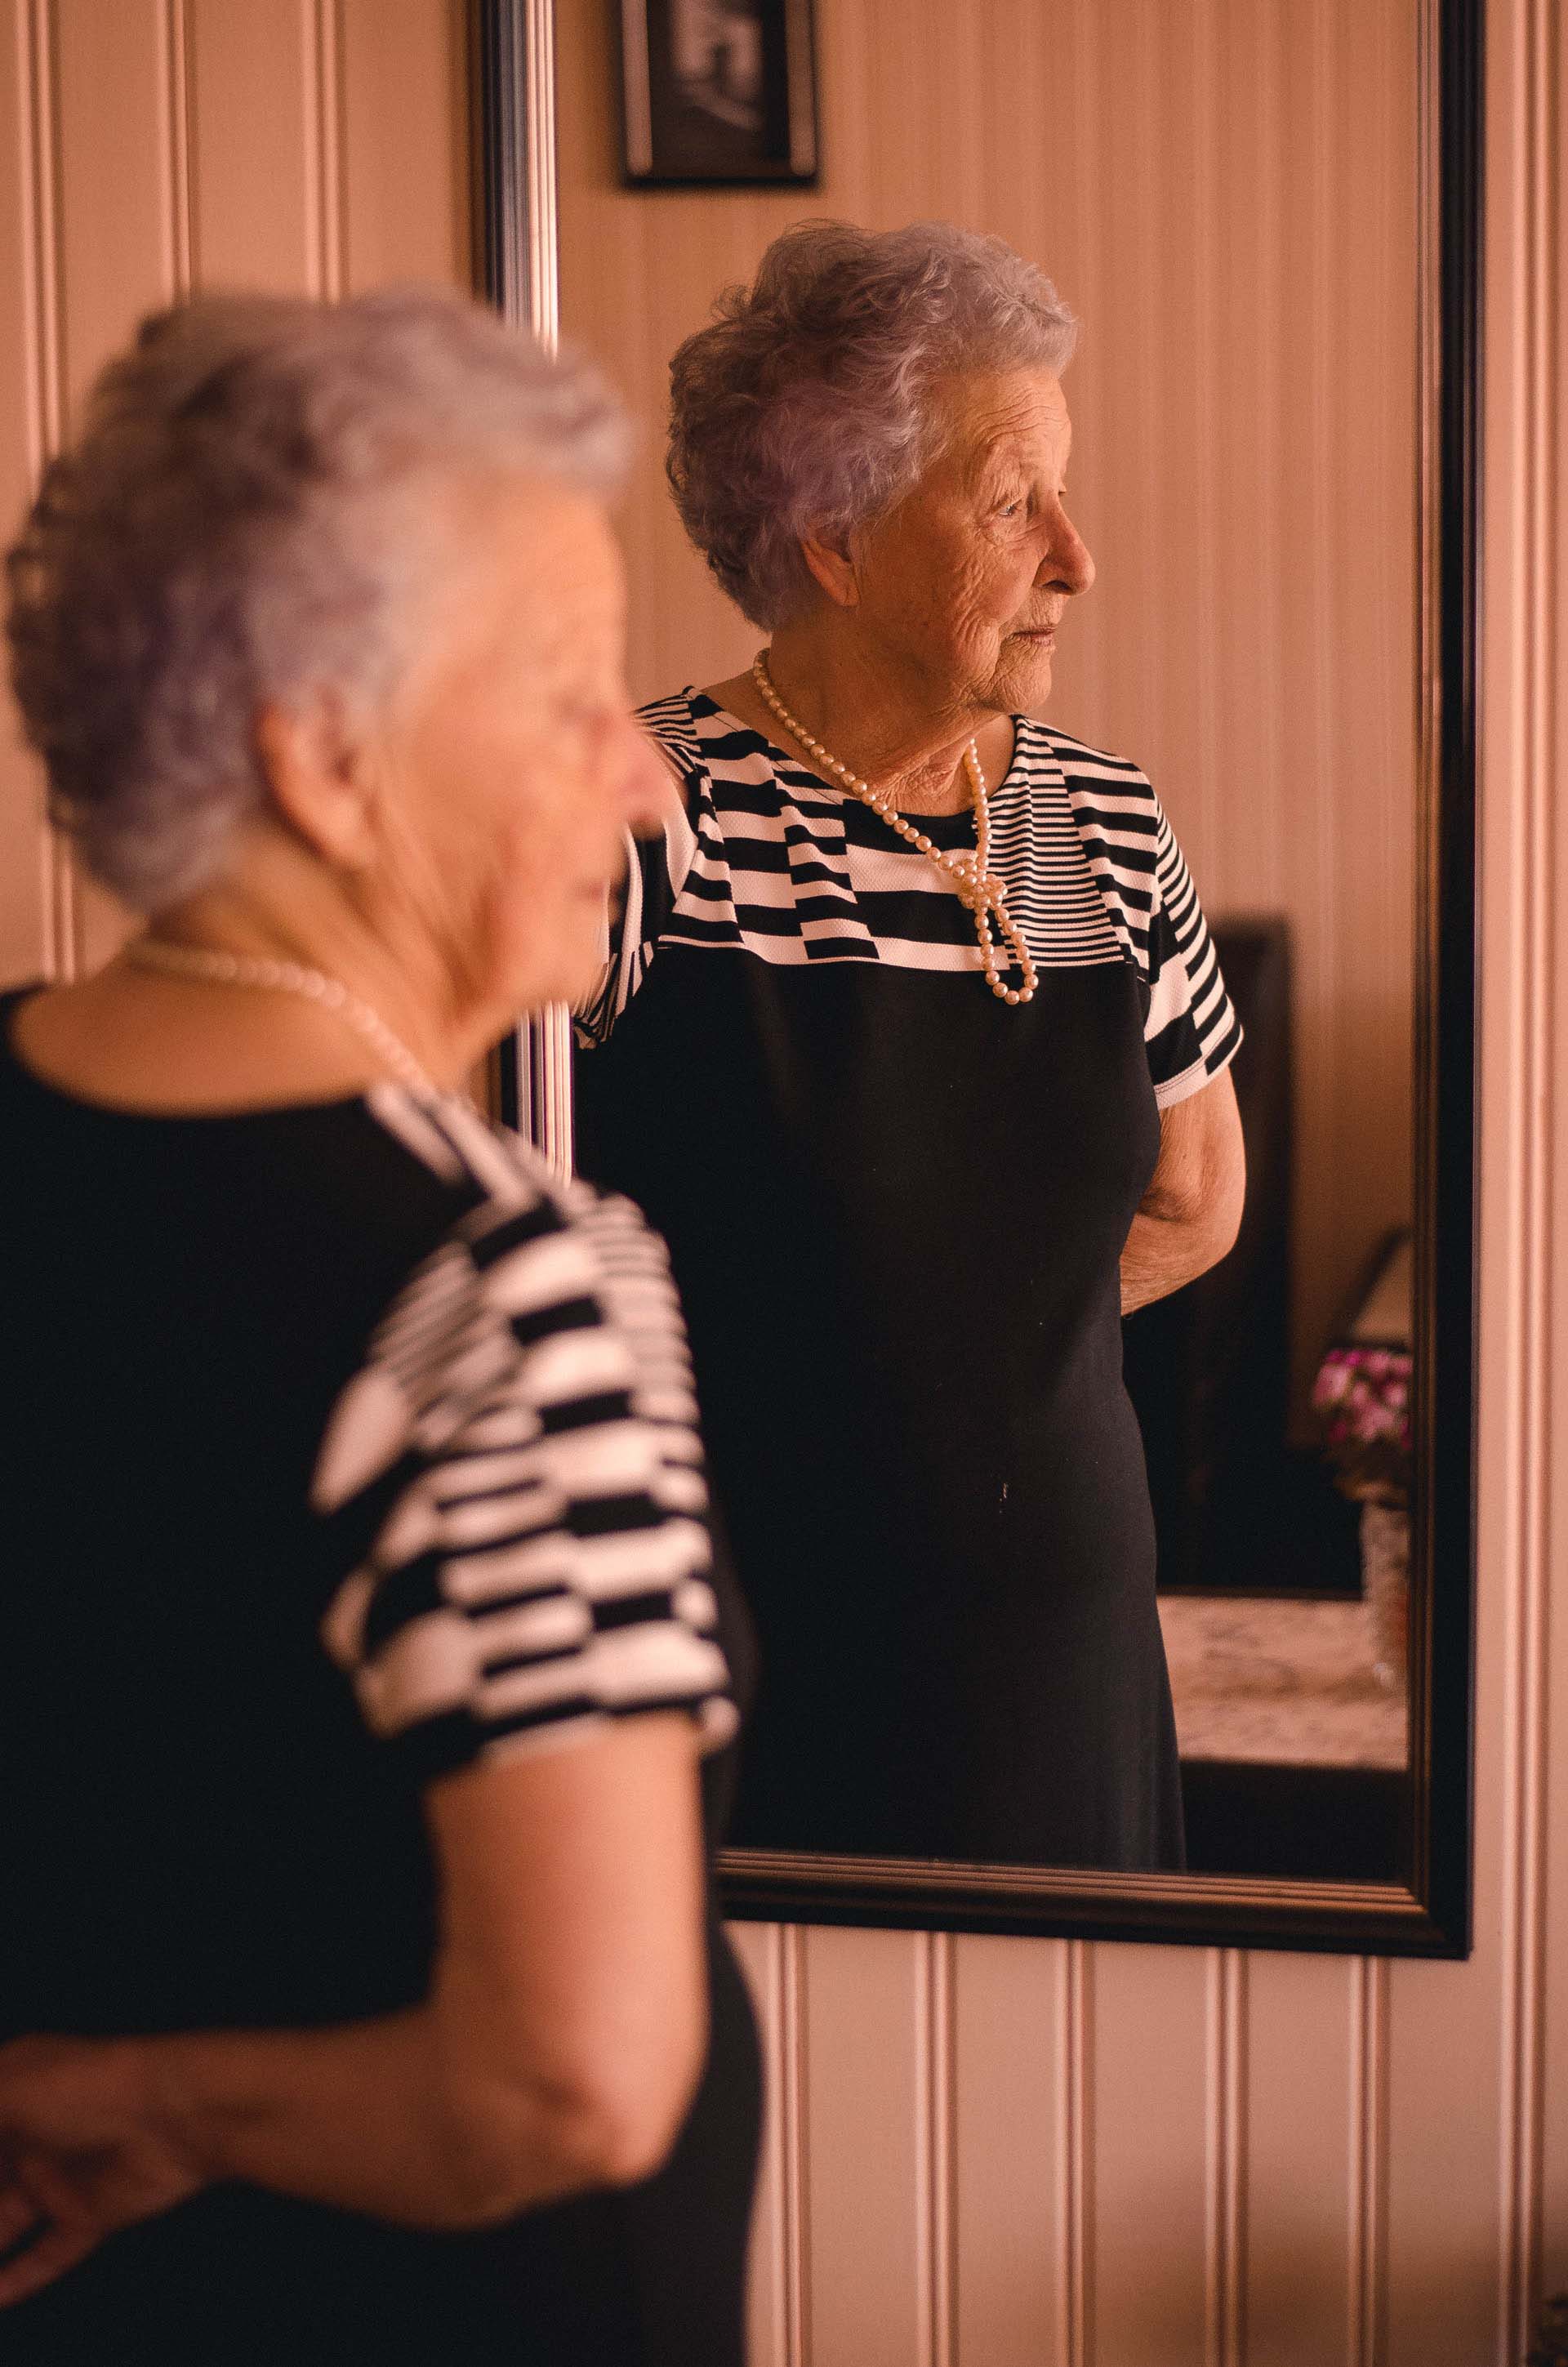 An elderly woman standing with a black dress and gold necklace in front of a mirror